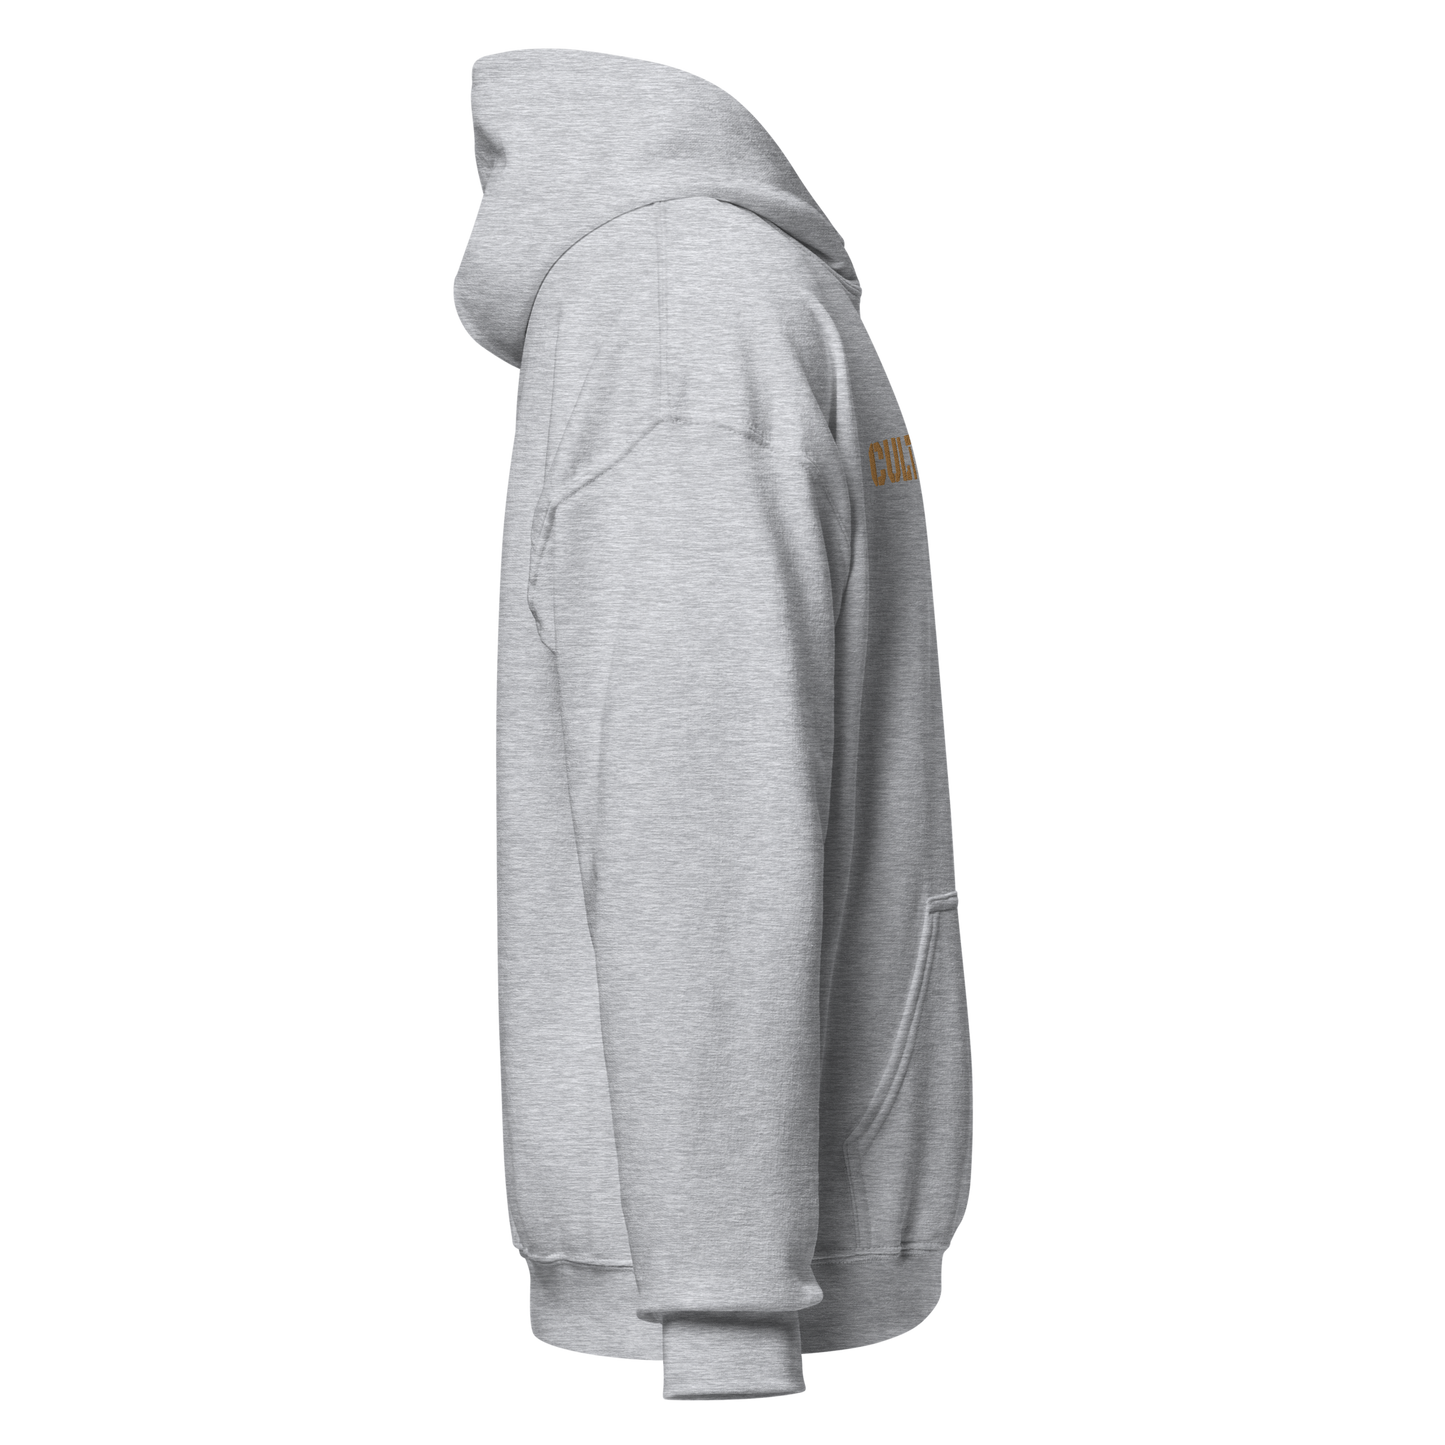 Cultivate Embroidered Hoodie